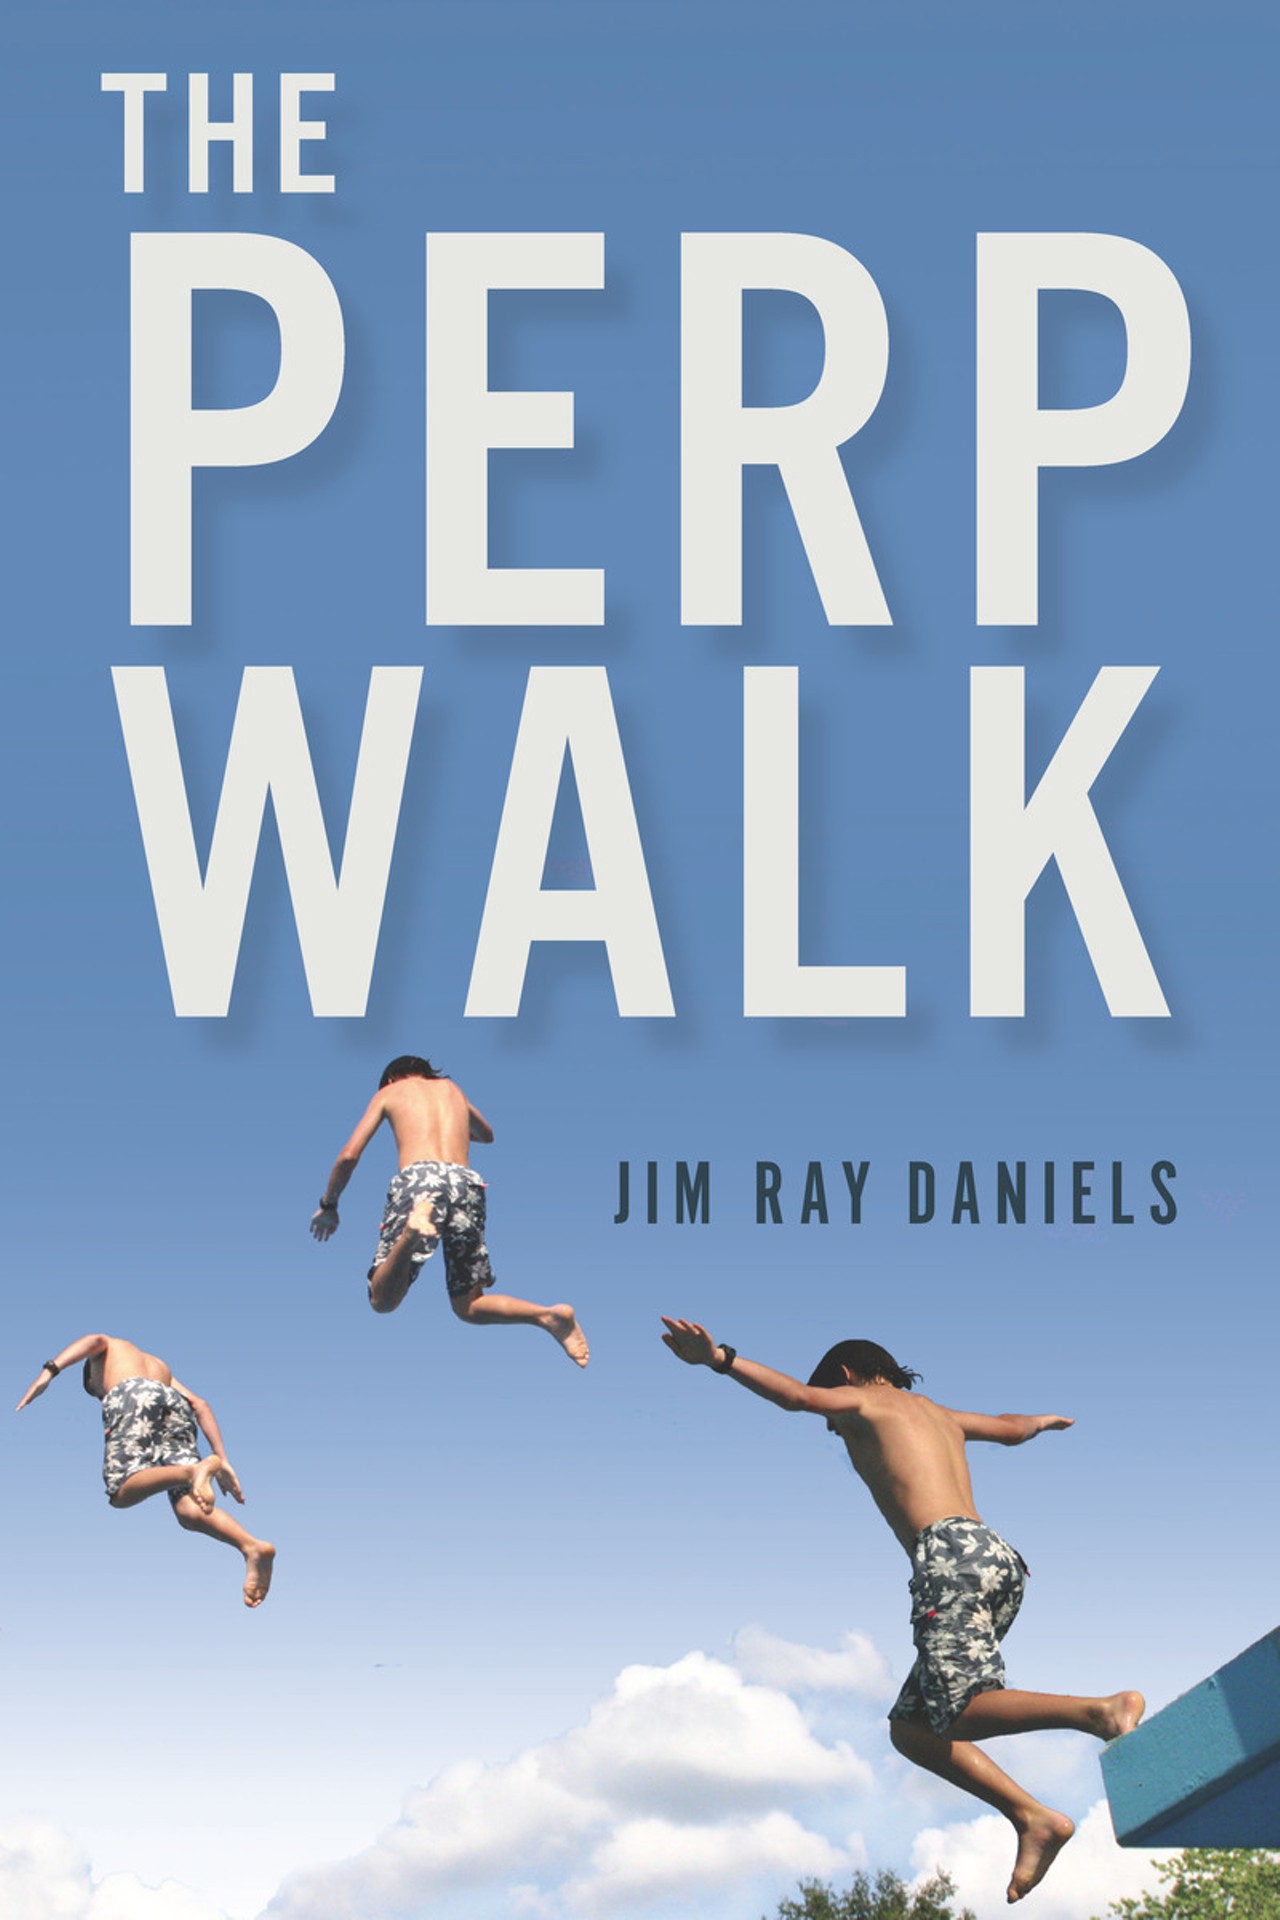 The Perp Walk
&#147;The Perp Walk&#148; is a practice in law enforcement that pertains to taking an arrested suspect through a public place. For Jim Ray Daniels, &#147;The Perp Walk&#148; refers to the guilt and shame for the mistakes we have made and take into adult life. &#147;While I use Detroit as a touchstone in many of these stories, as I have in other books, I&#146;m also trying to experiment with the whole concept of fiction &#151; what is true, what isn&#146;t, how we all construct our own versions of events,&#148; Daniels says.